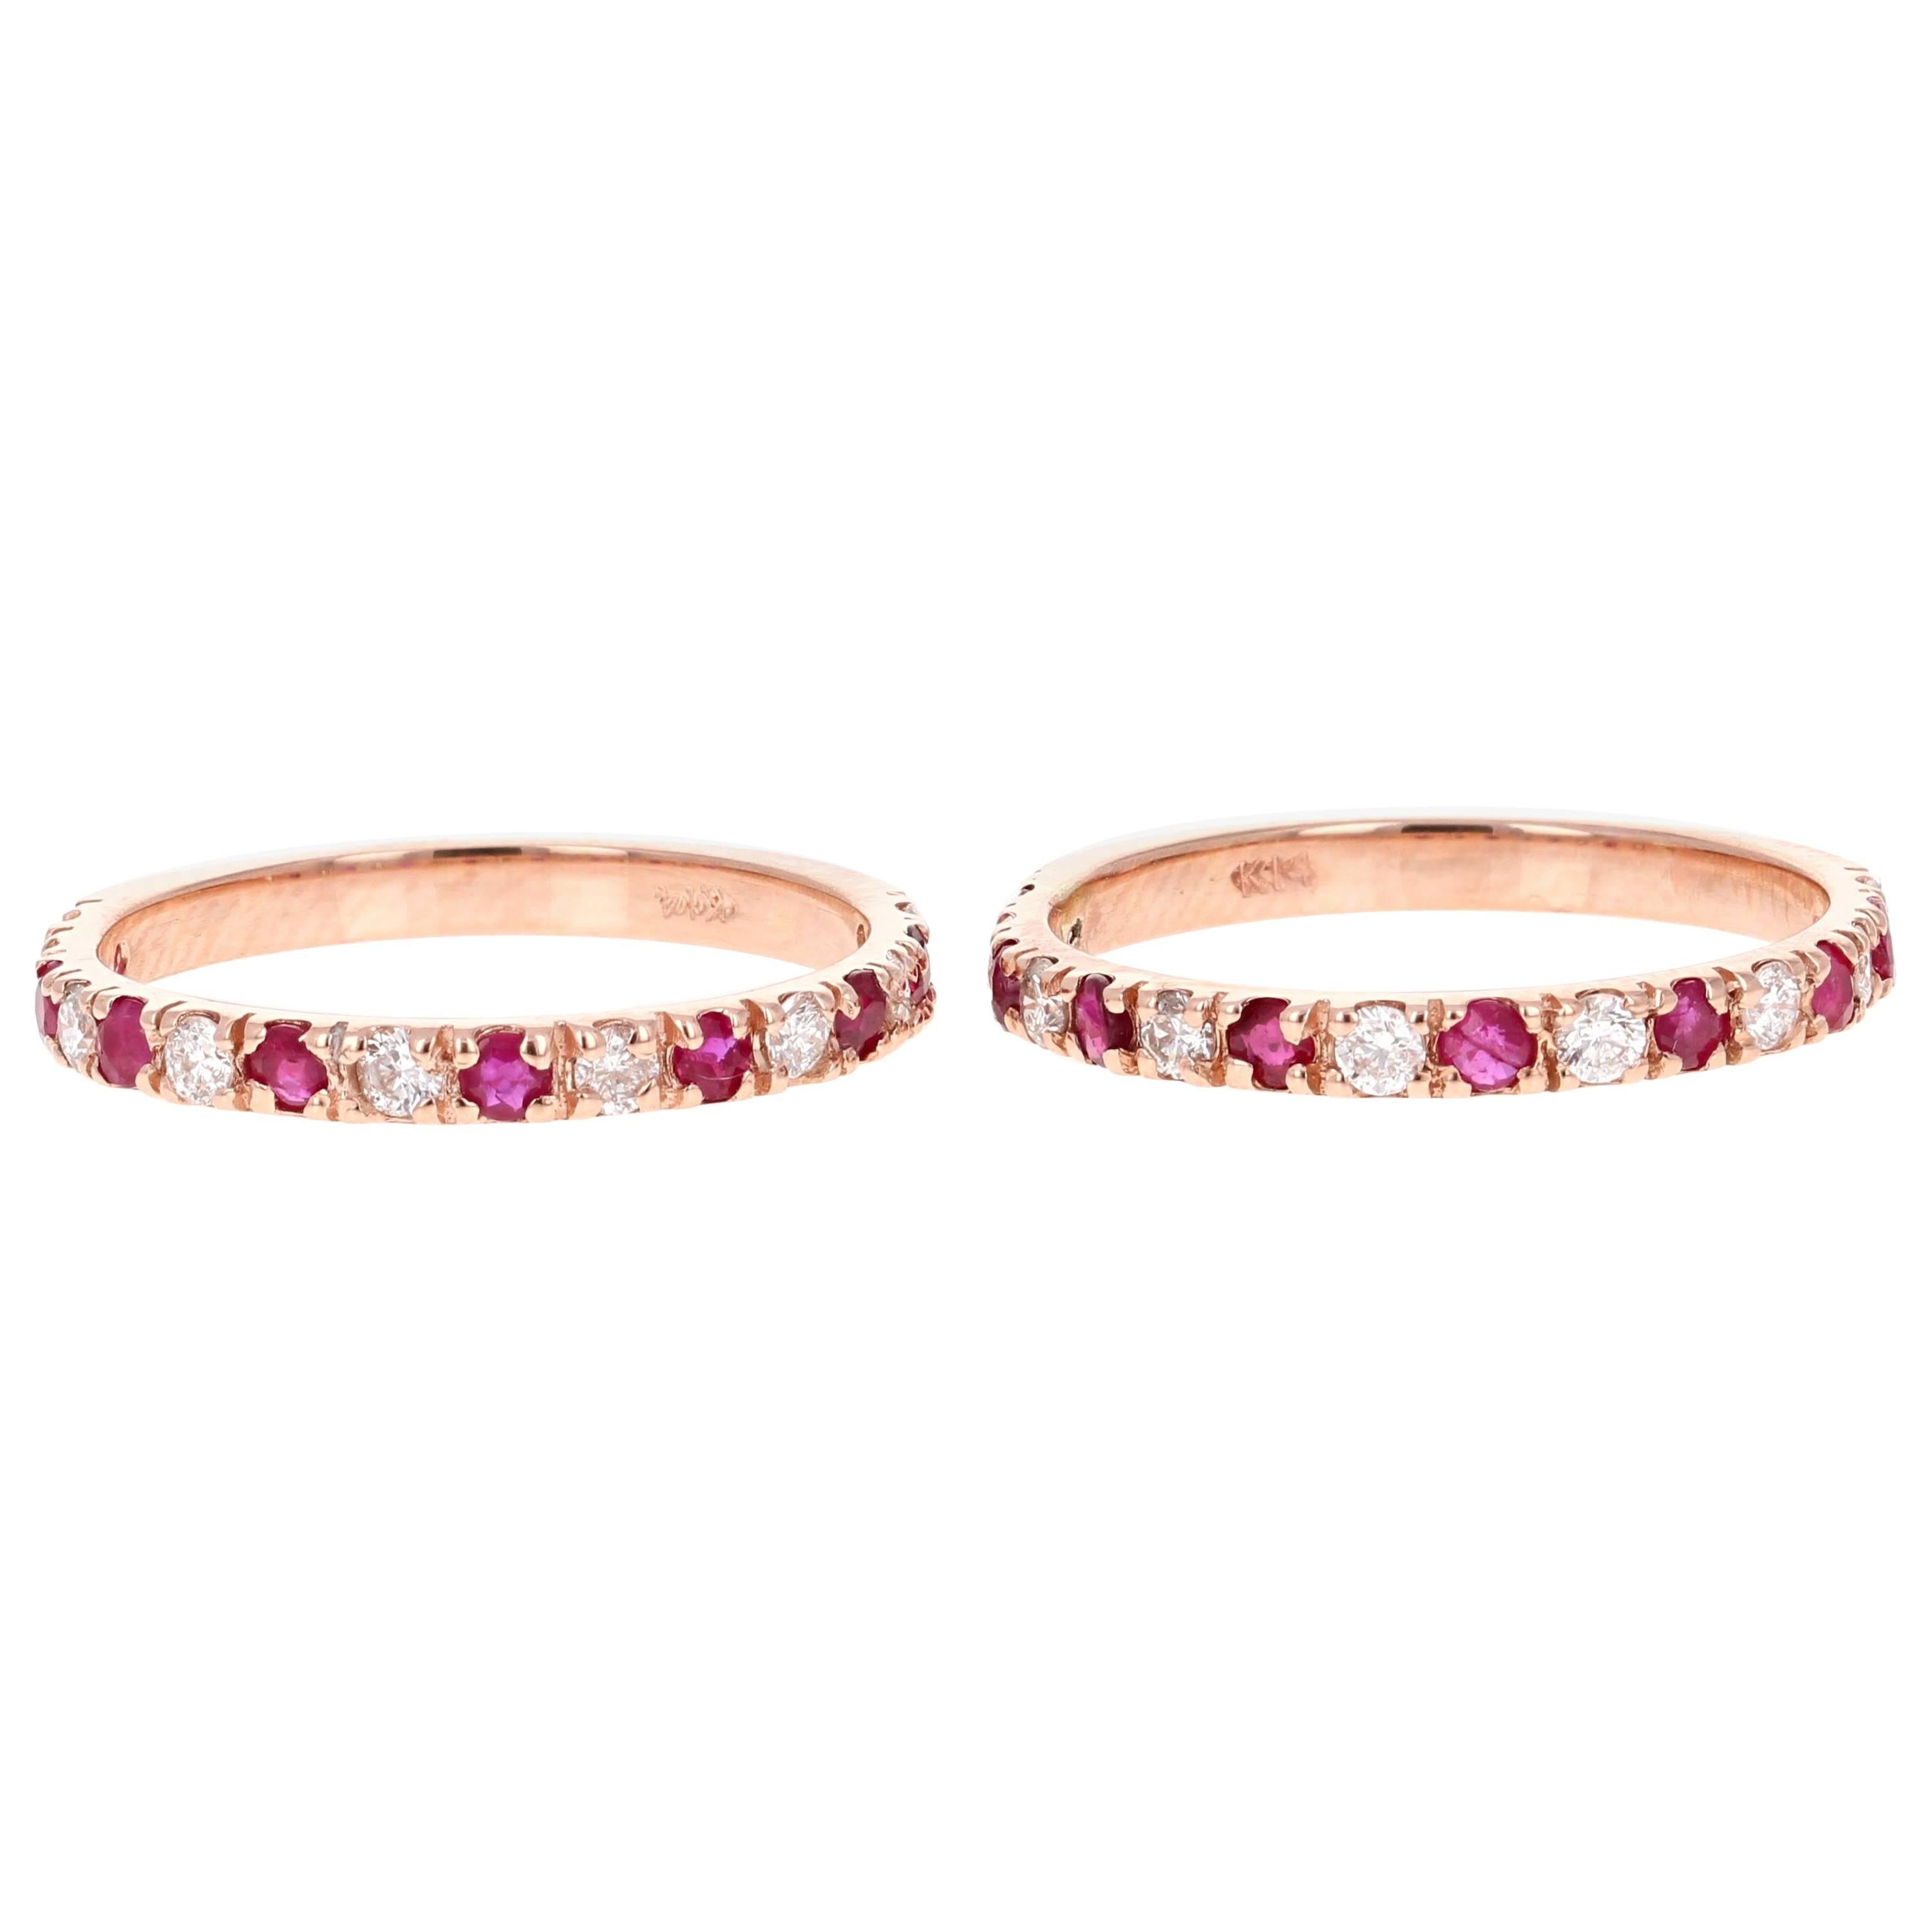 1.22 Carat Ruby Diamond 14K Rose Gold Stack-able Bands